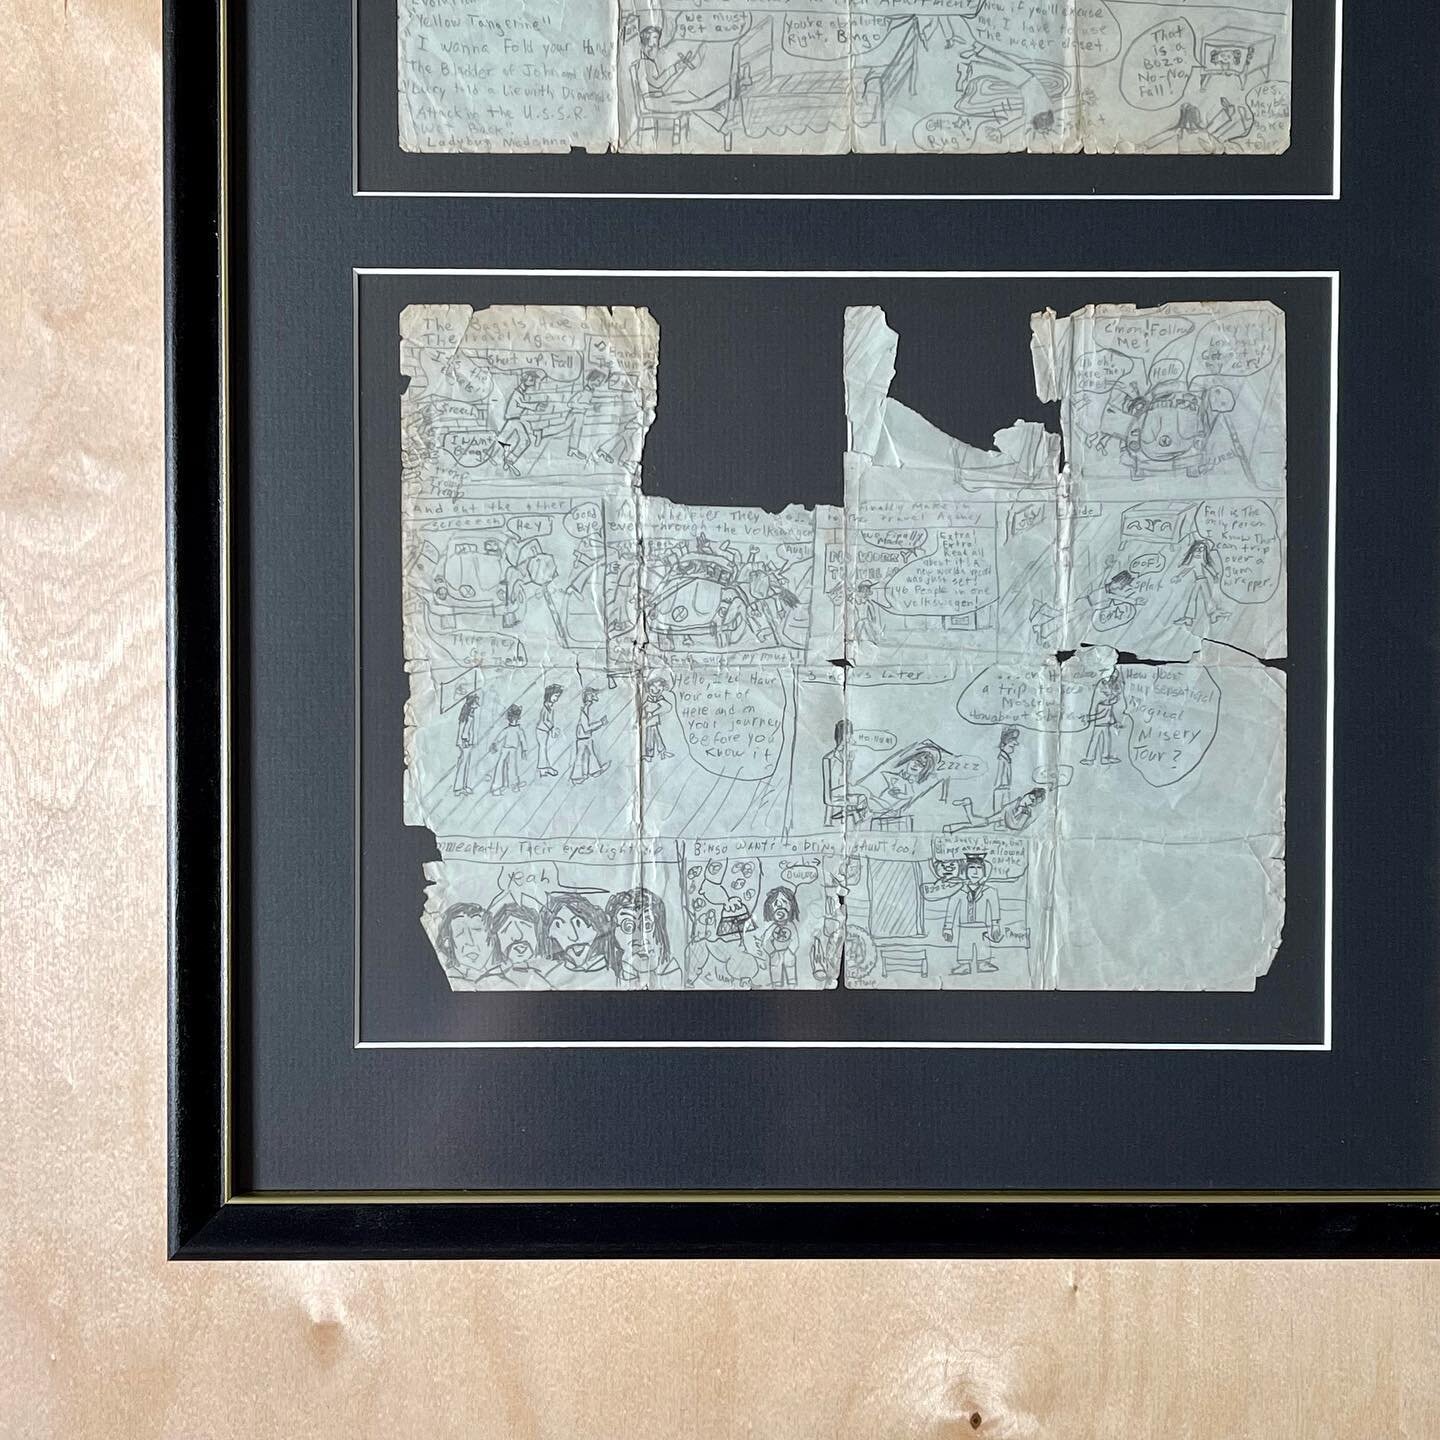 Framing fragile items with the proper materials is essential for their preservation. We have been framing antiques, newspapers and documents for 36 years, and take great pride in this conservation work. 

#tapgalleryvinelandnj #customframing #conserv